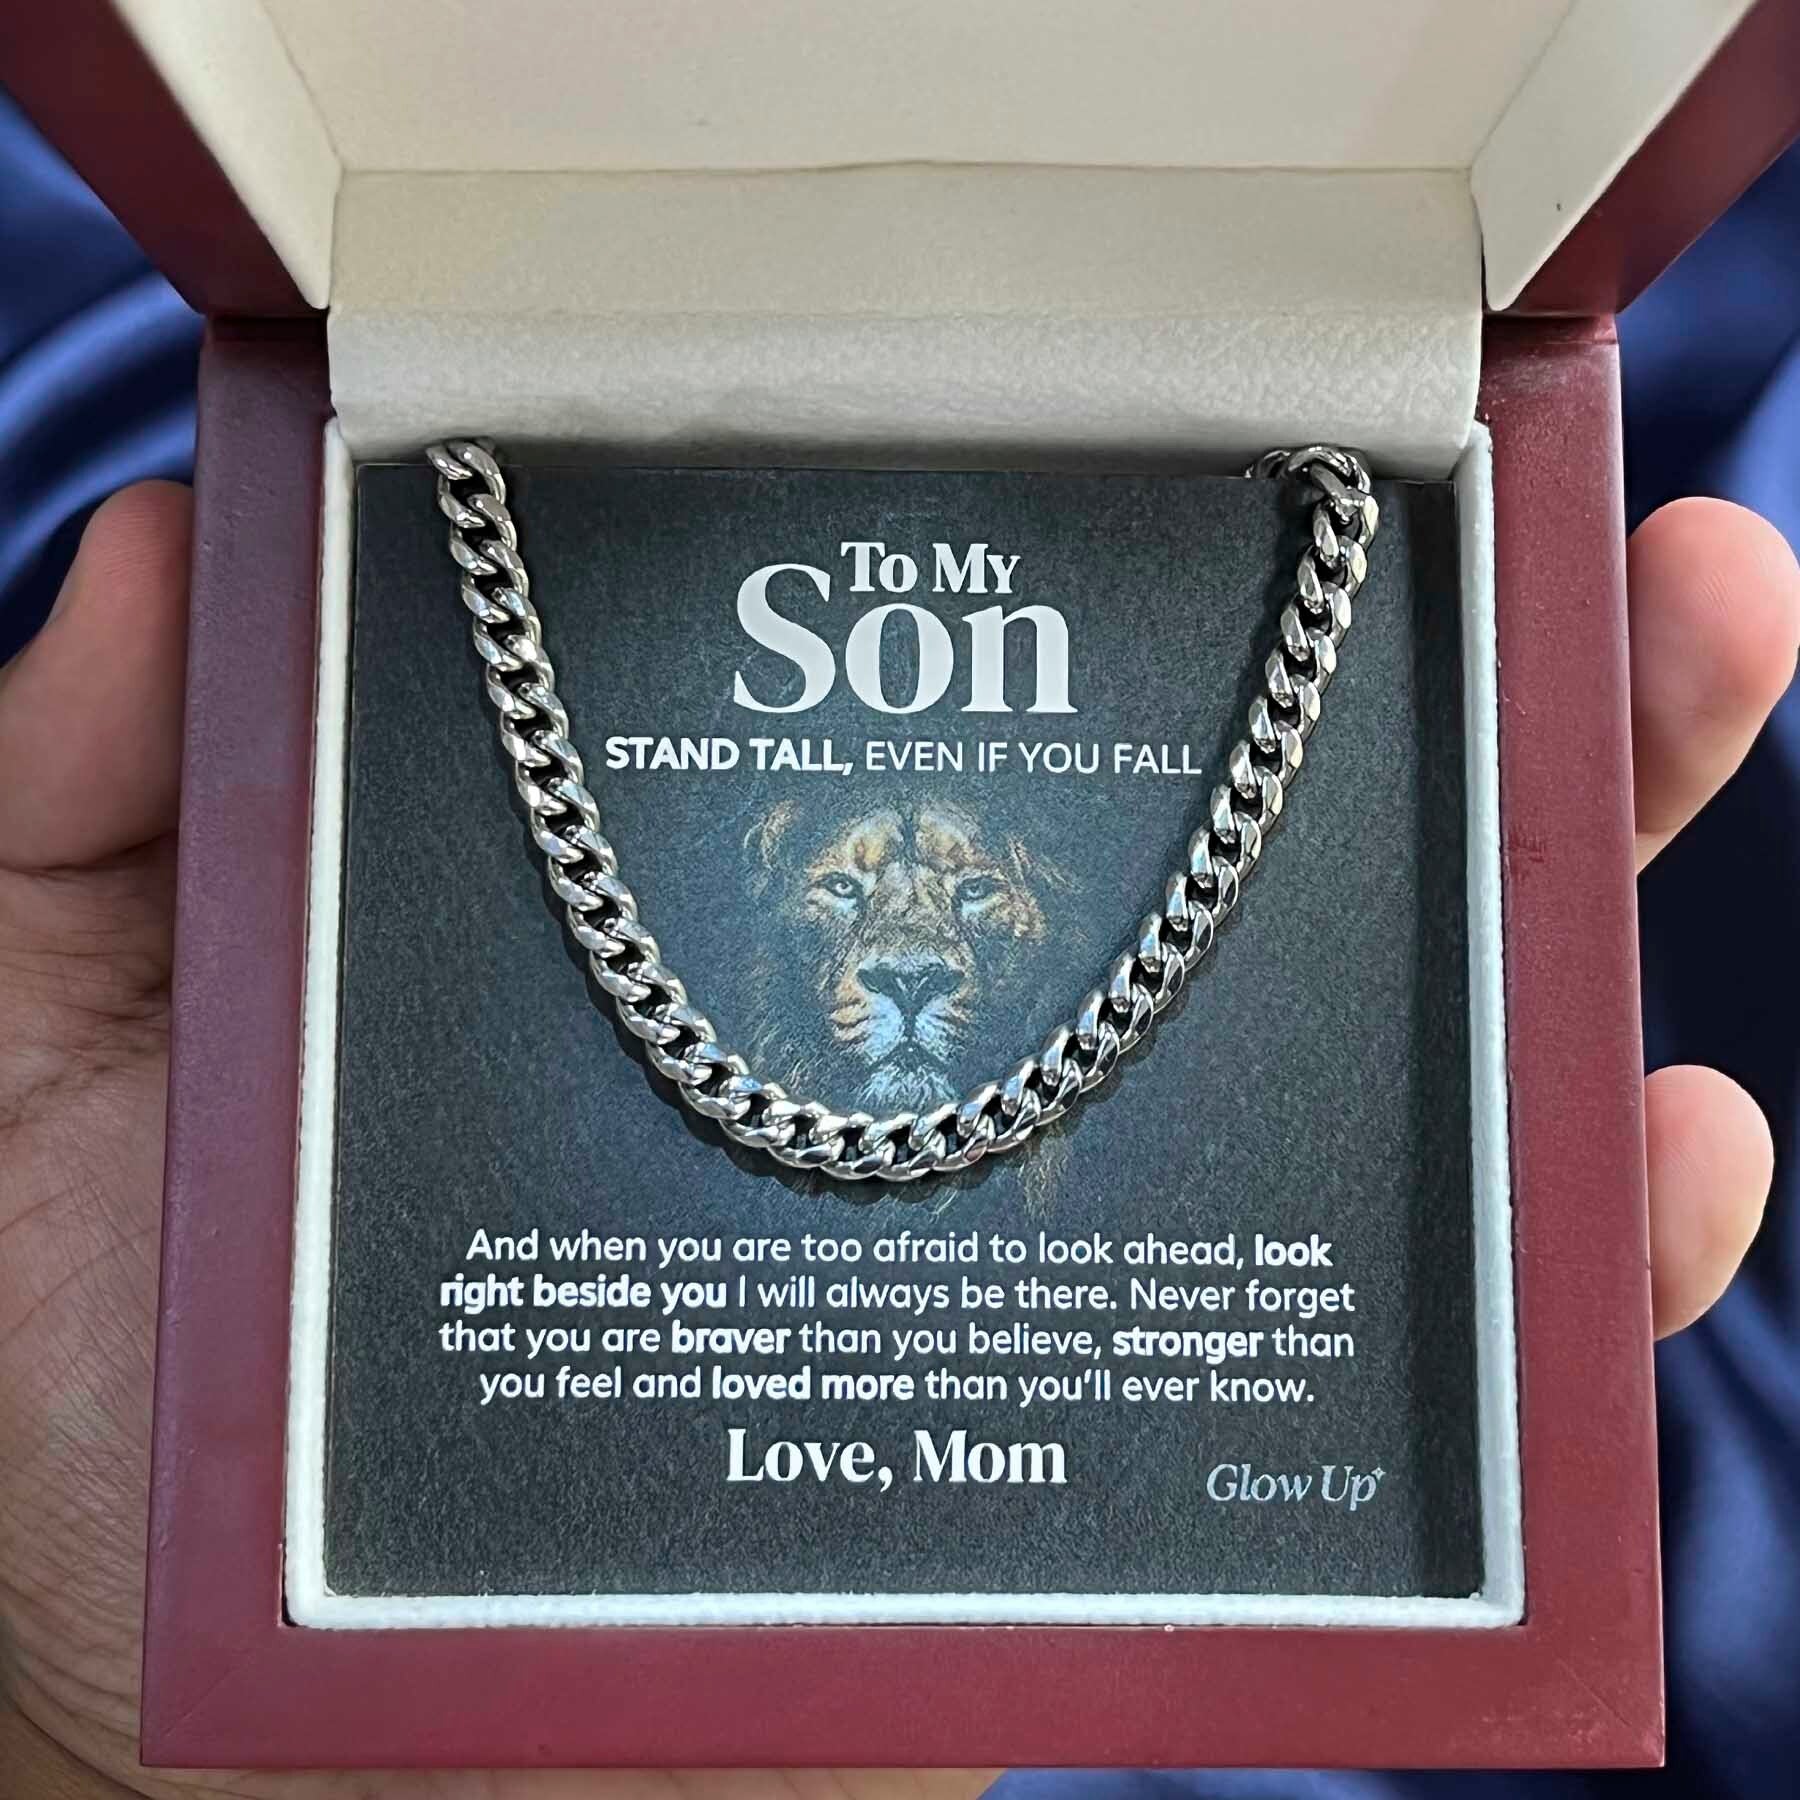 Glow Up Cuban Link Chain To my Son from Mom - 5mm Cuban Link Chain - Stand Tall